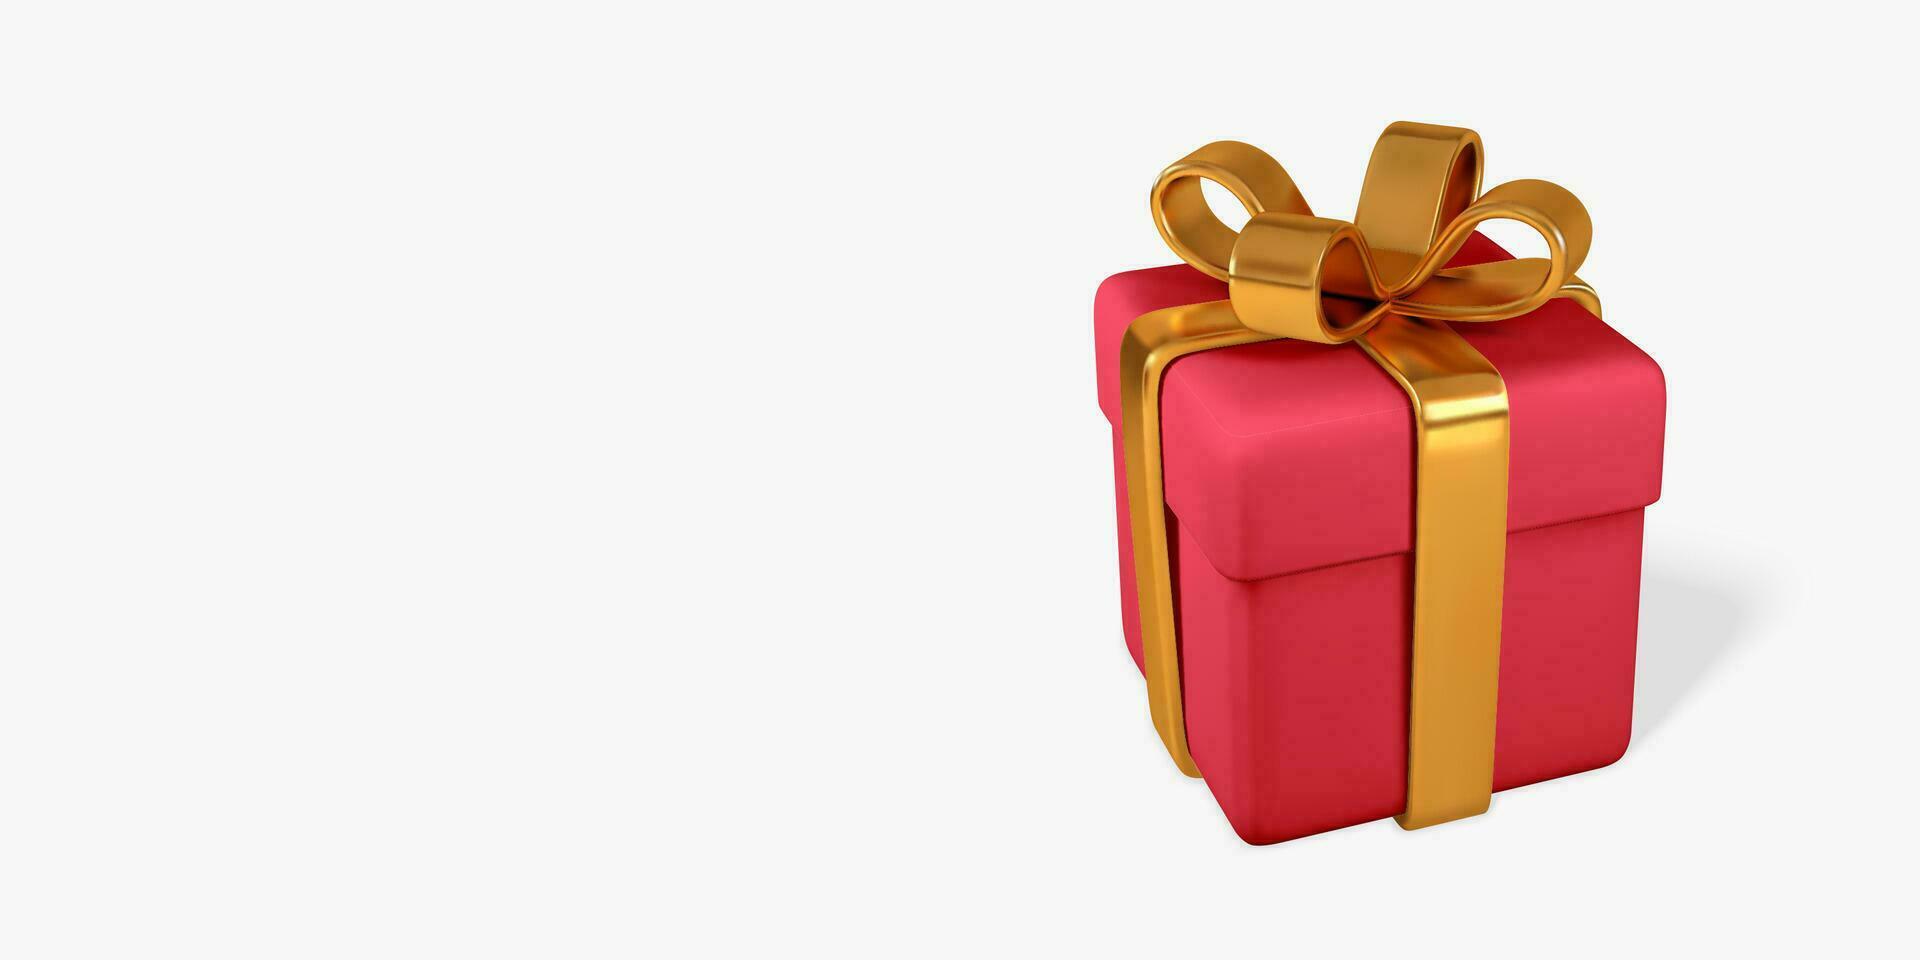 3D realistic red gift box with golden bow and ribbon. Paper box isolated on light background. Vector illustration